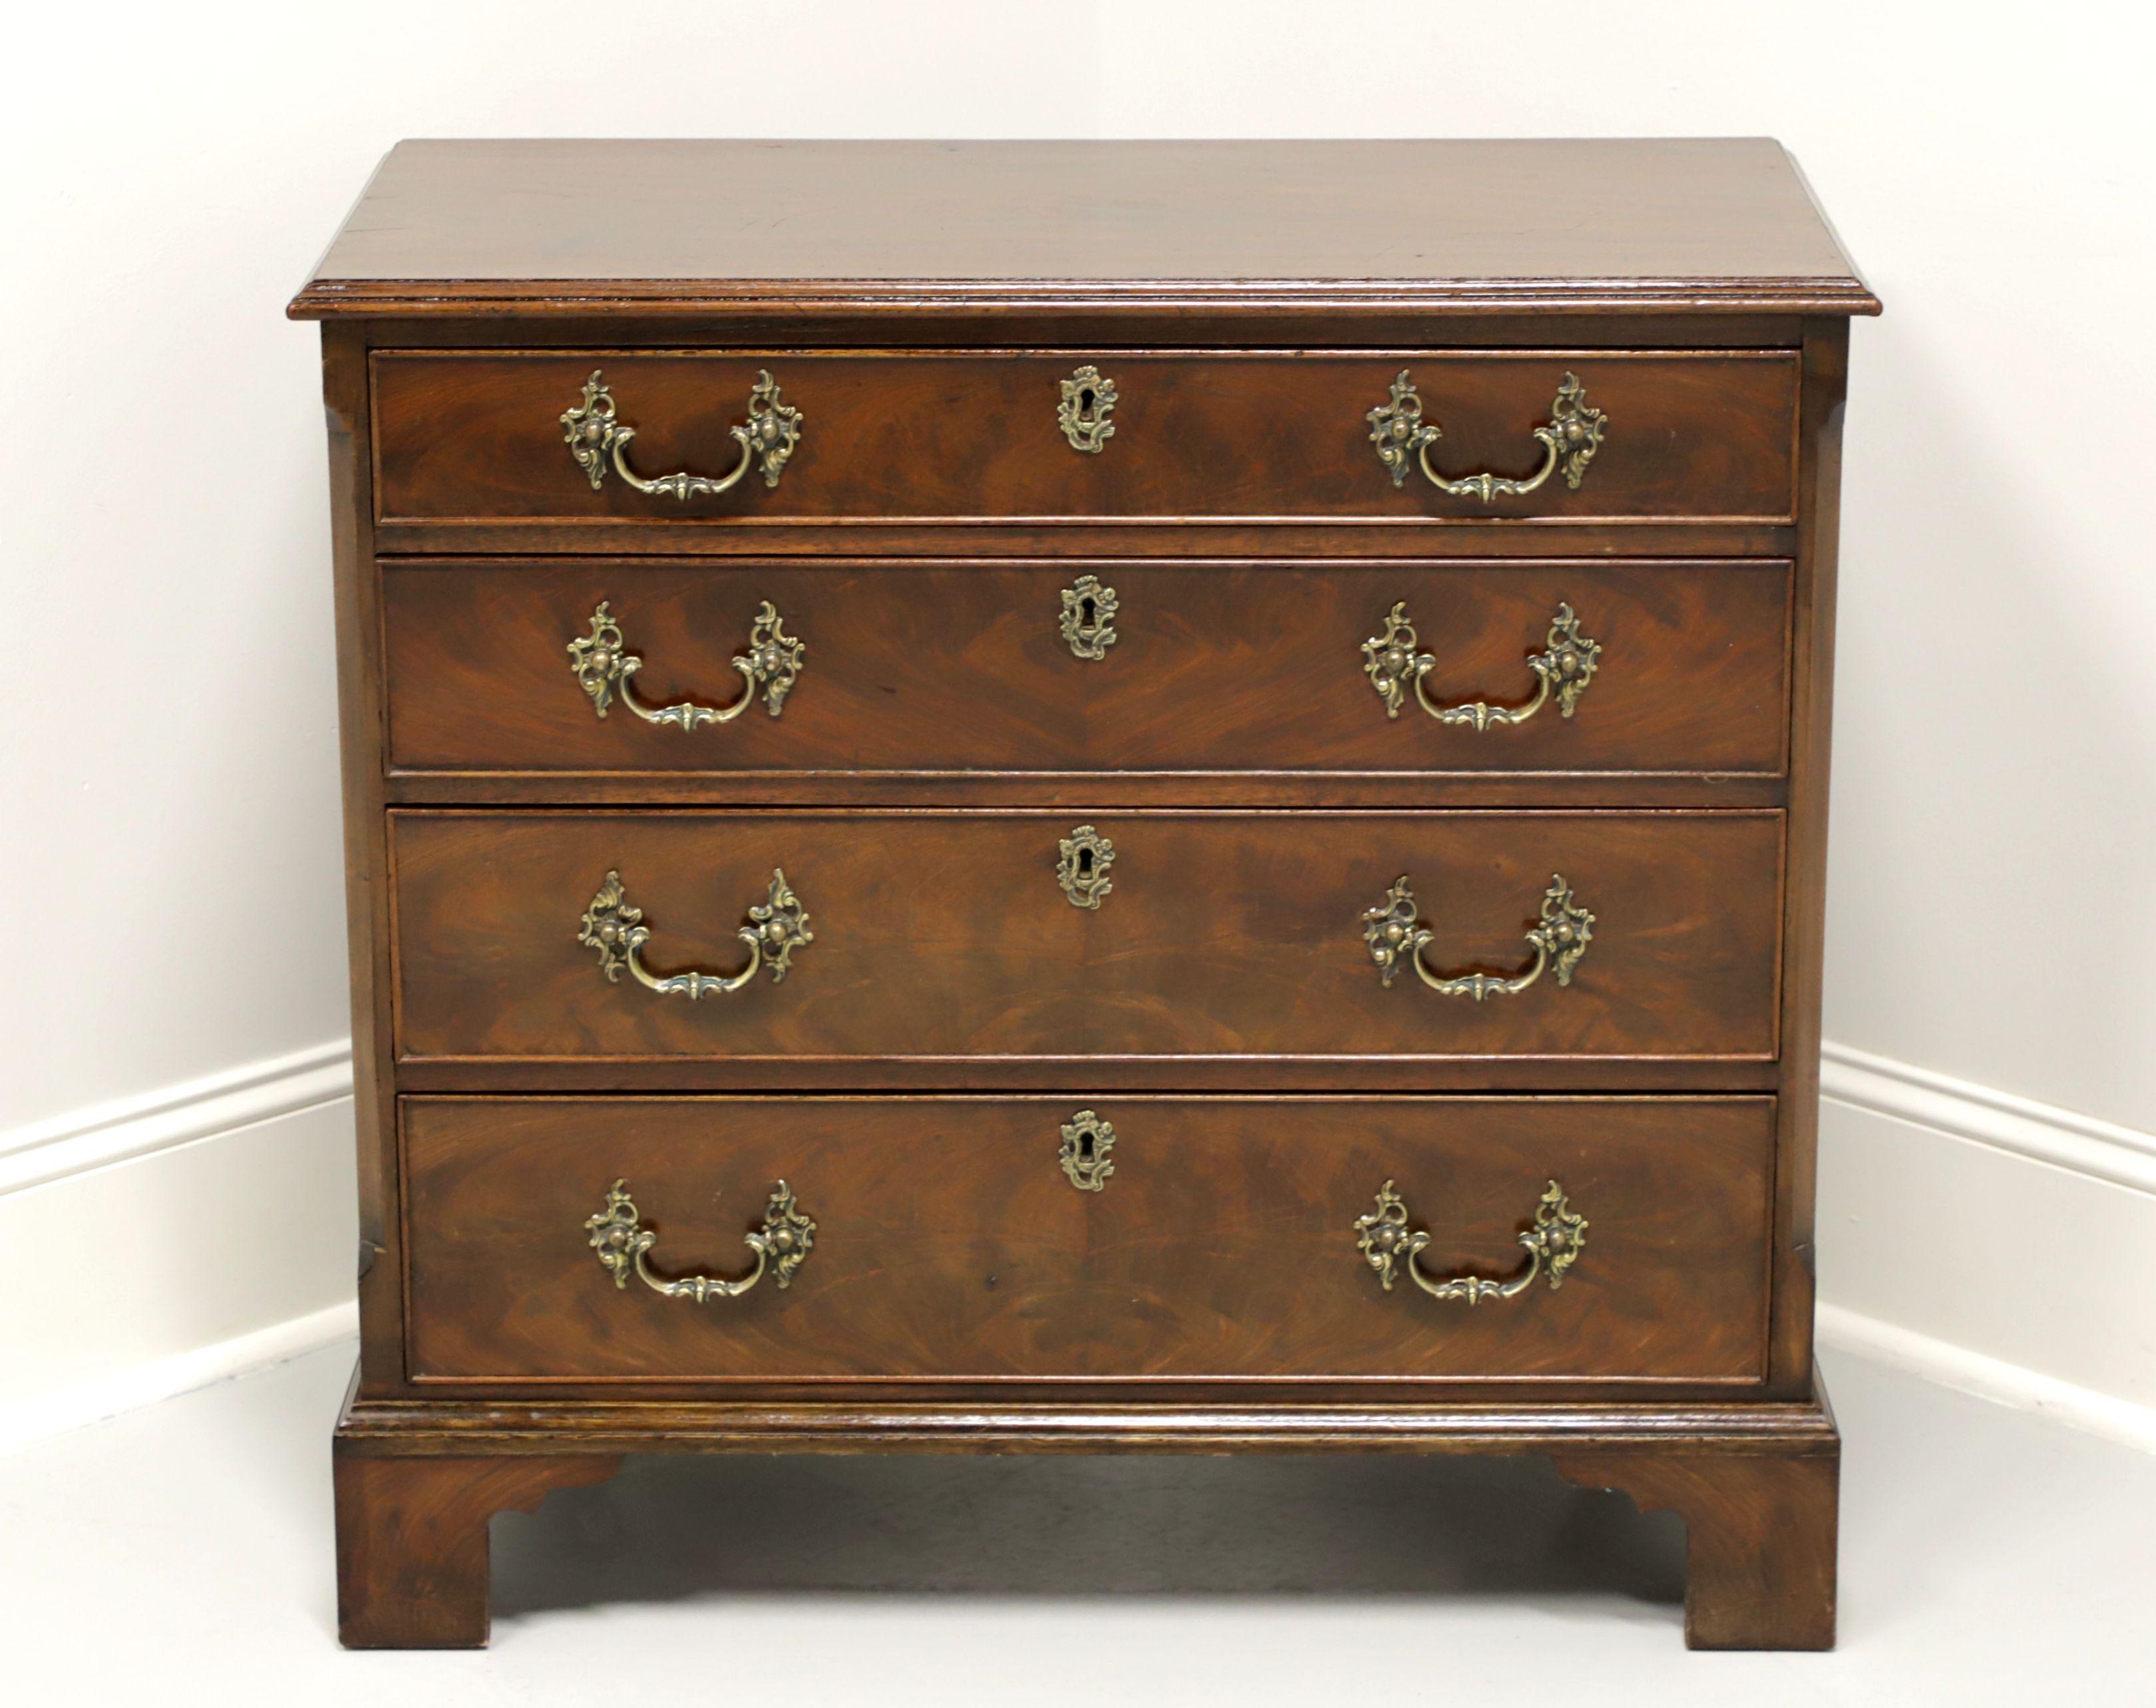 An antique 19th Century Georgian style bachelor chest, unbranded. Walnut with brass hardware and bracket feet. Features four drawers of hand dovetailed construction with locks. Made in the 19th Century in Scotland.

Measures: 32.75w 16.75d